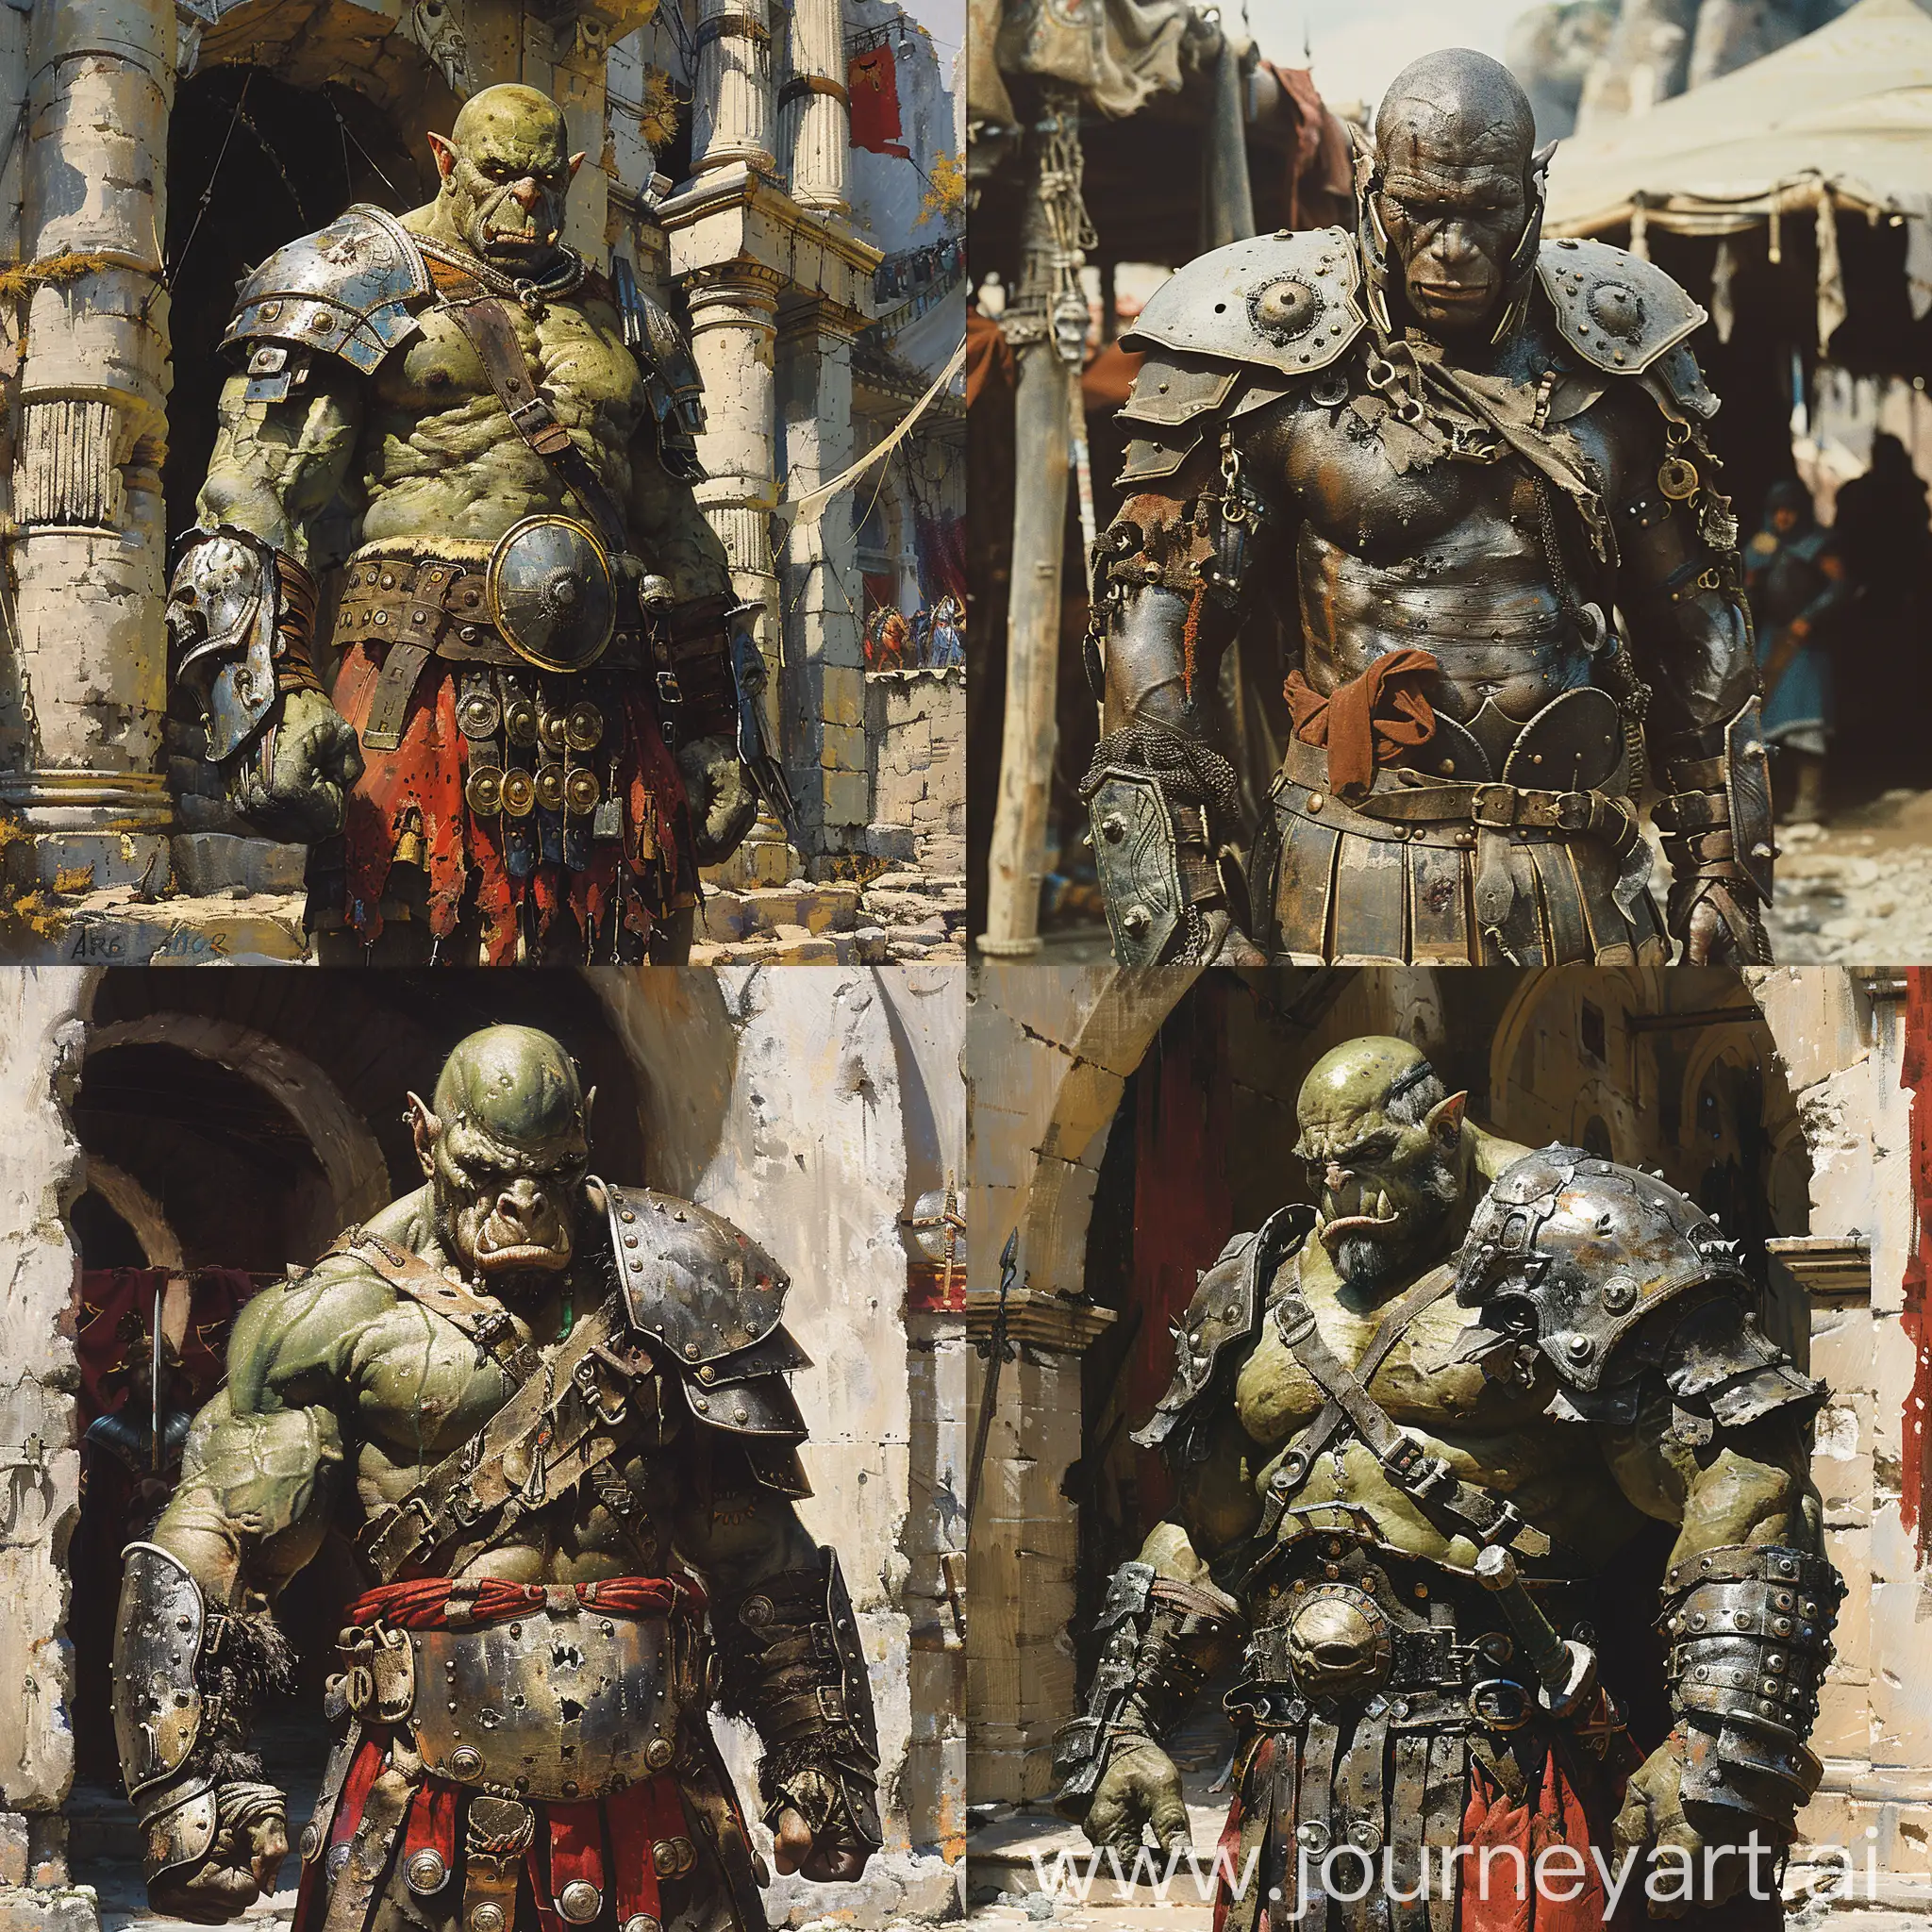 Armored-Orc-Soldier-Guarding-War-Tent-Entrance